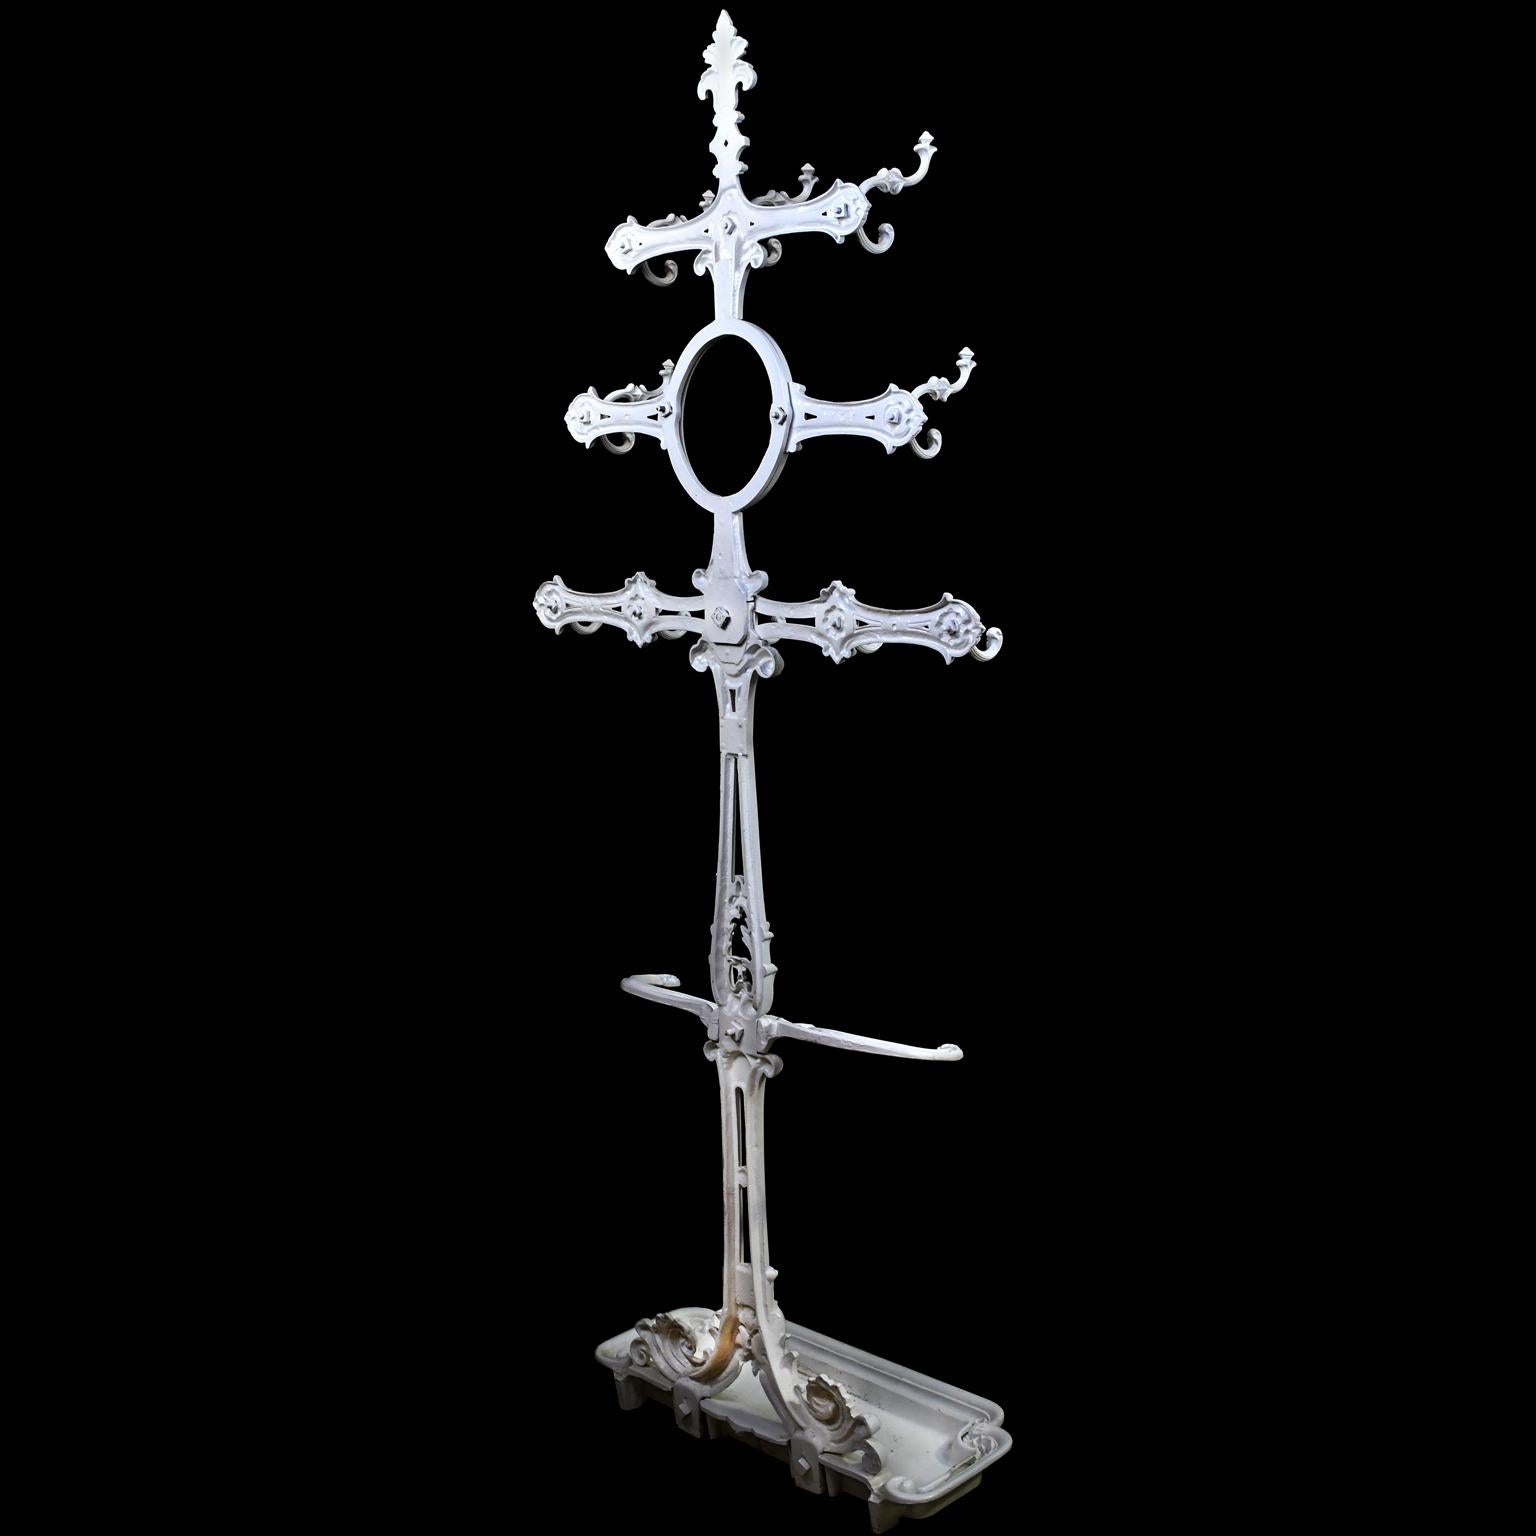 English Victorian Cast Iron Coat or Hat Rack with Umbrella Stand, circa 1870 For Sale